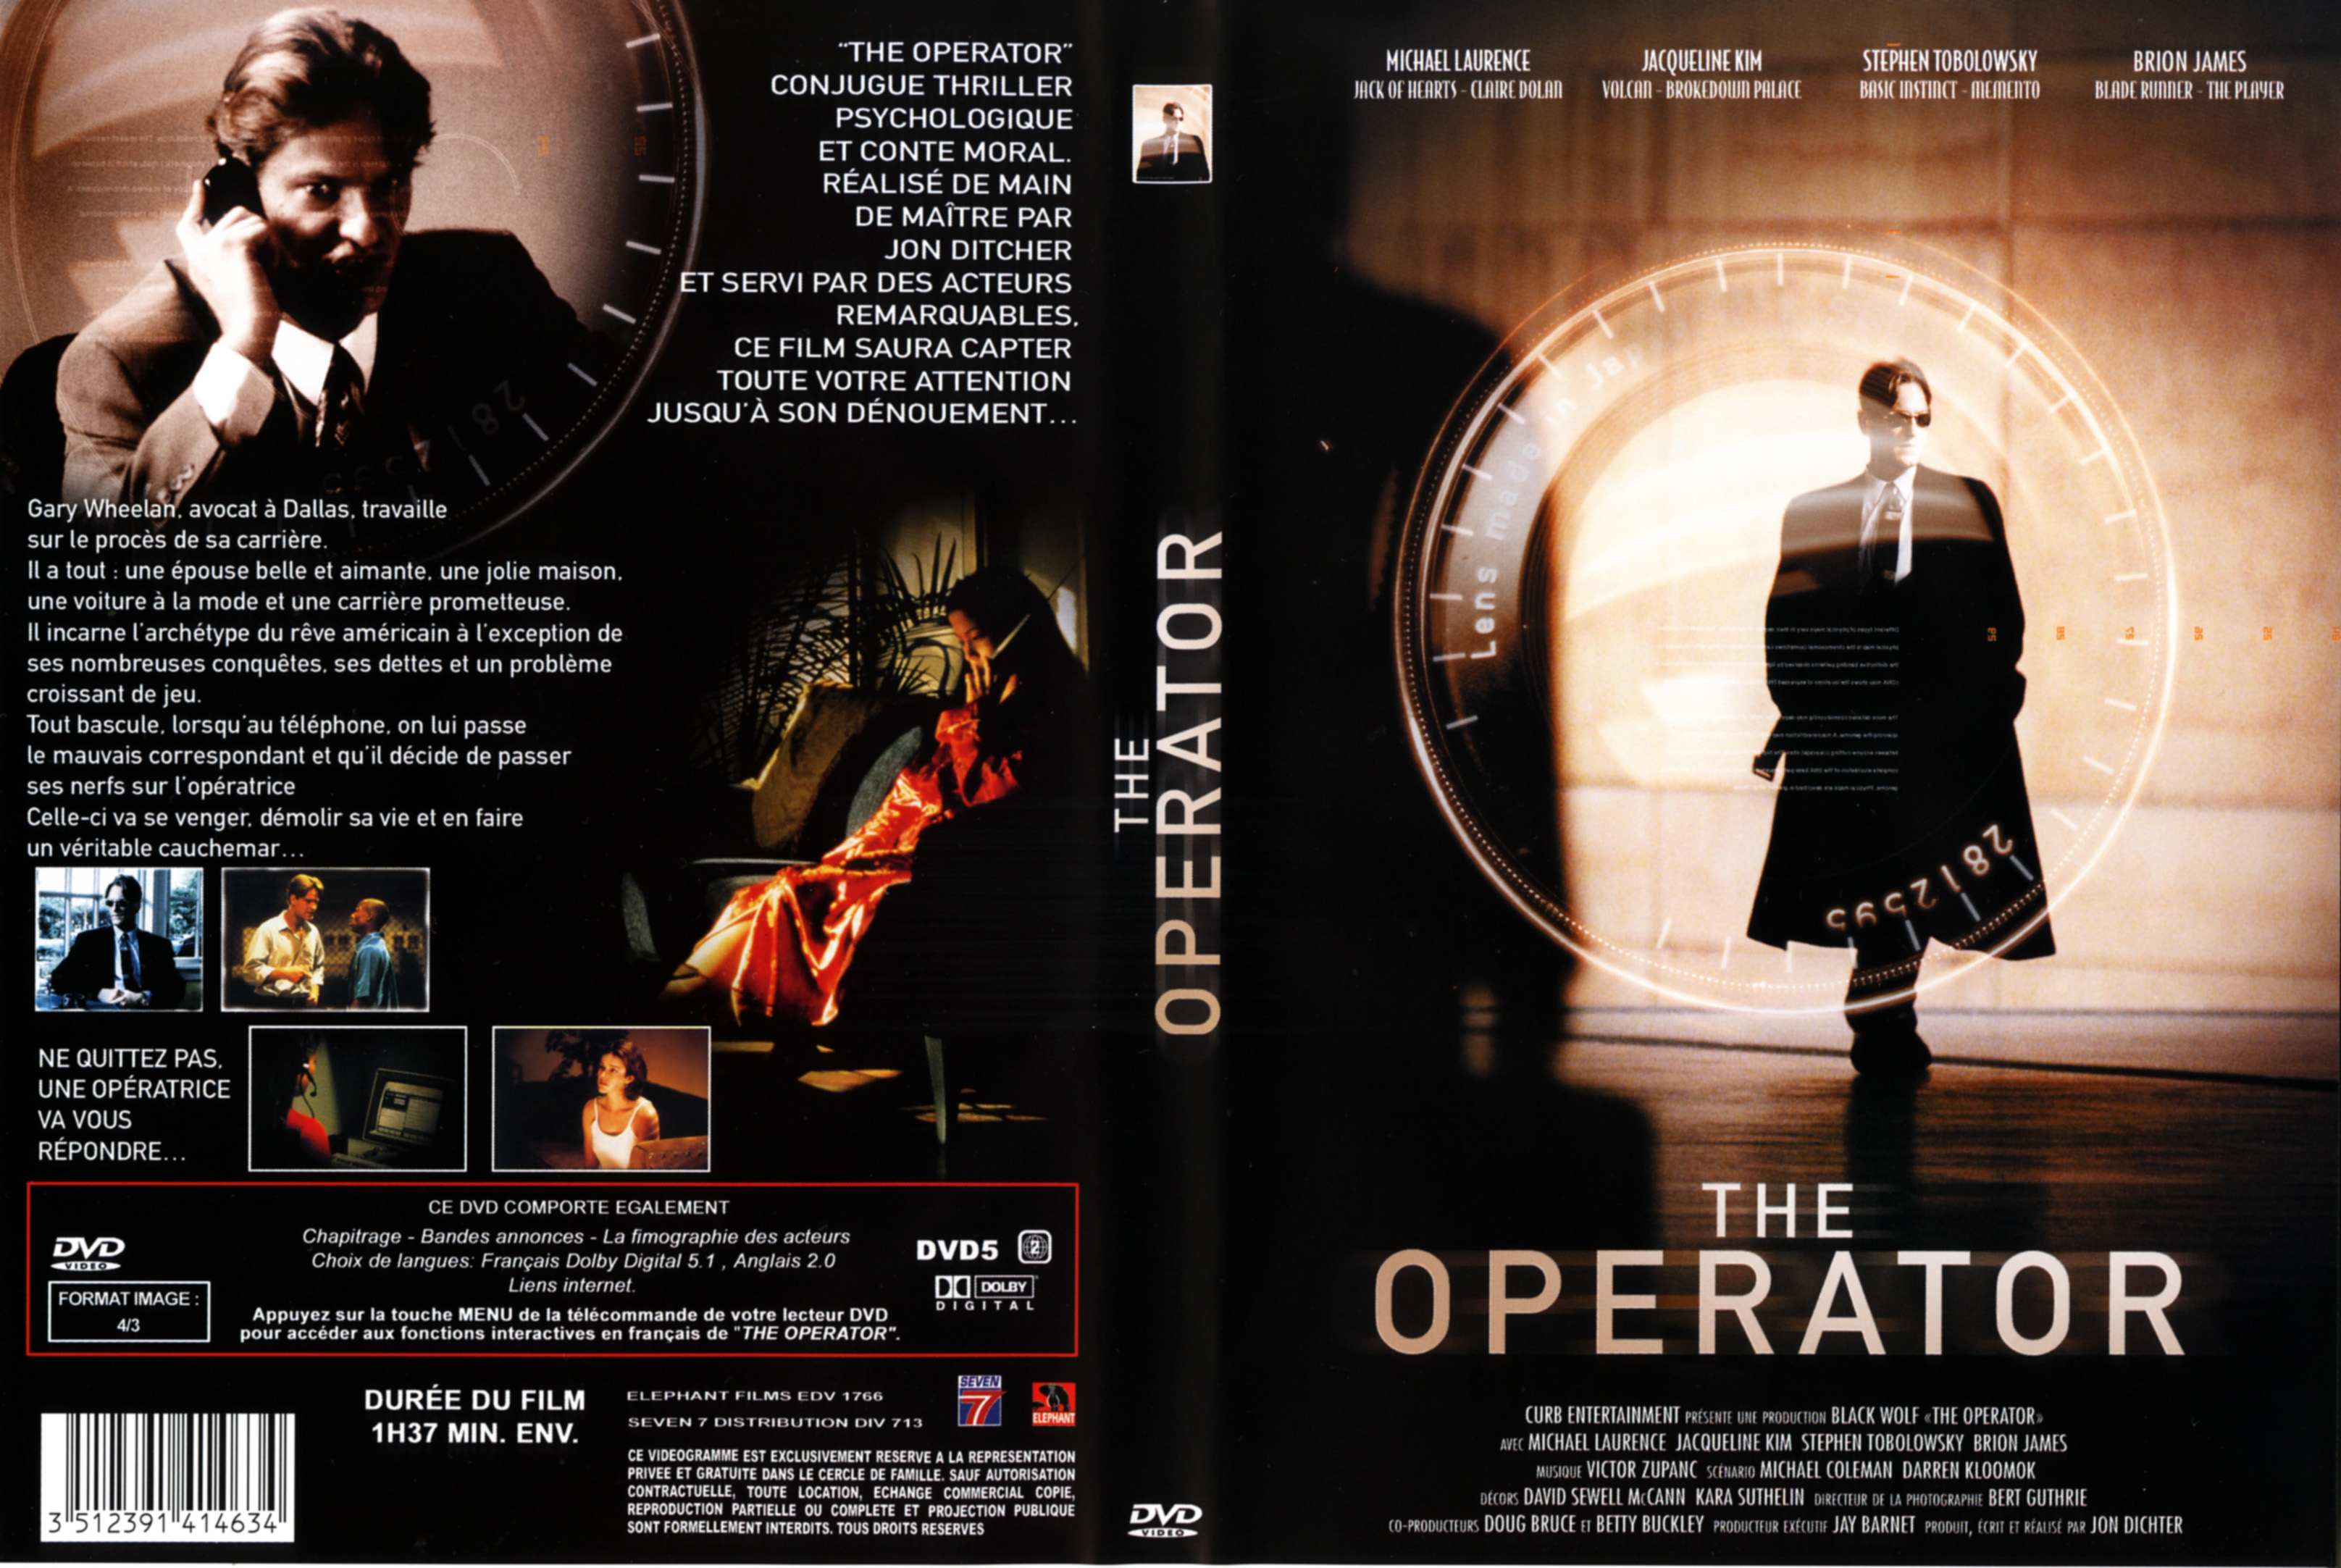 Jaquette DVD The operator